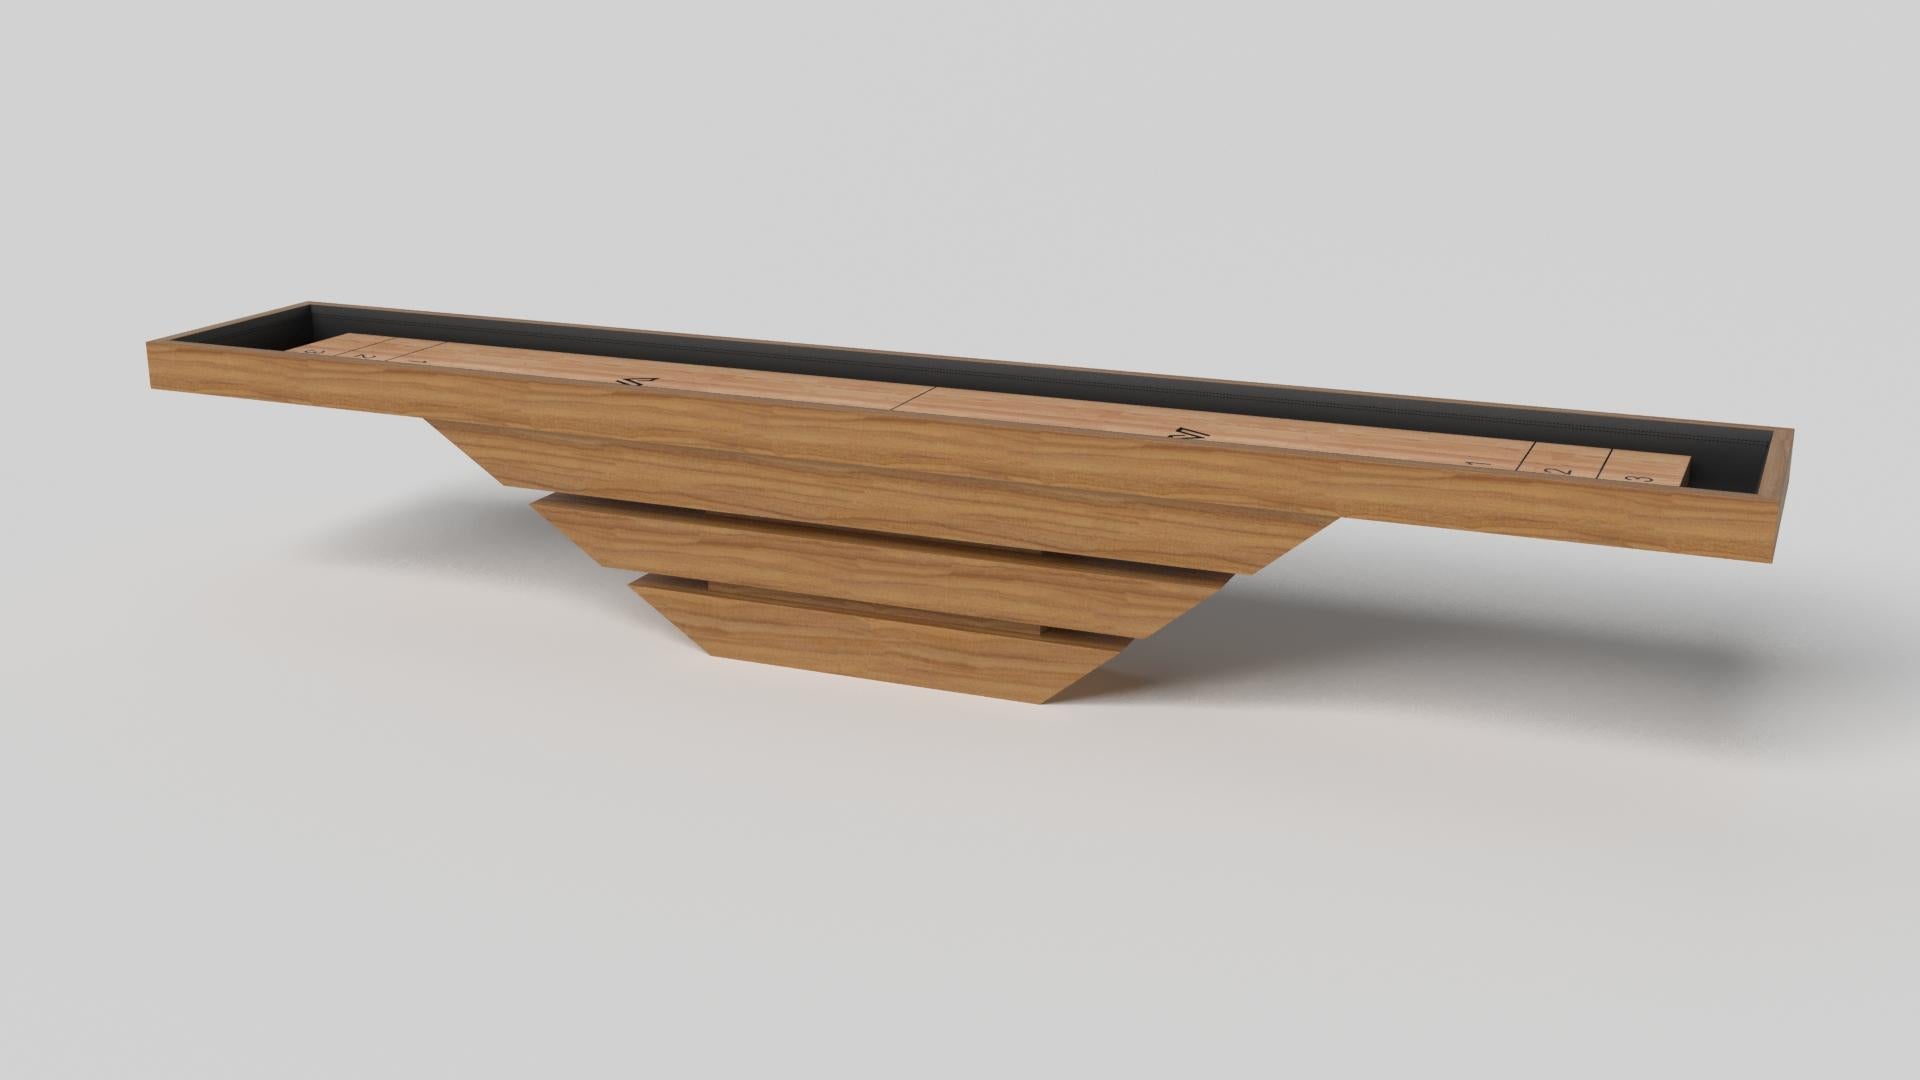 Three solid pieces of wood seemingly float around a concealed center base, making the Louve shuffleboard table in chrome one of our most mind-bending designs. Crafted from solid maple wood and detailed with a smooth professional grade Maple wood